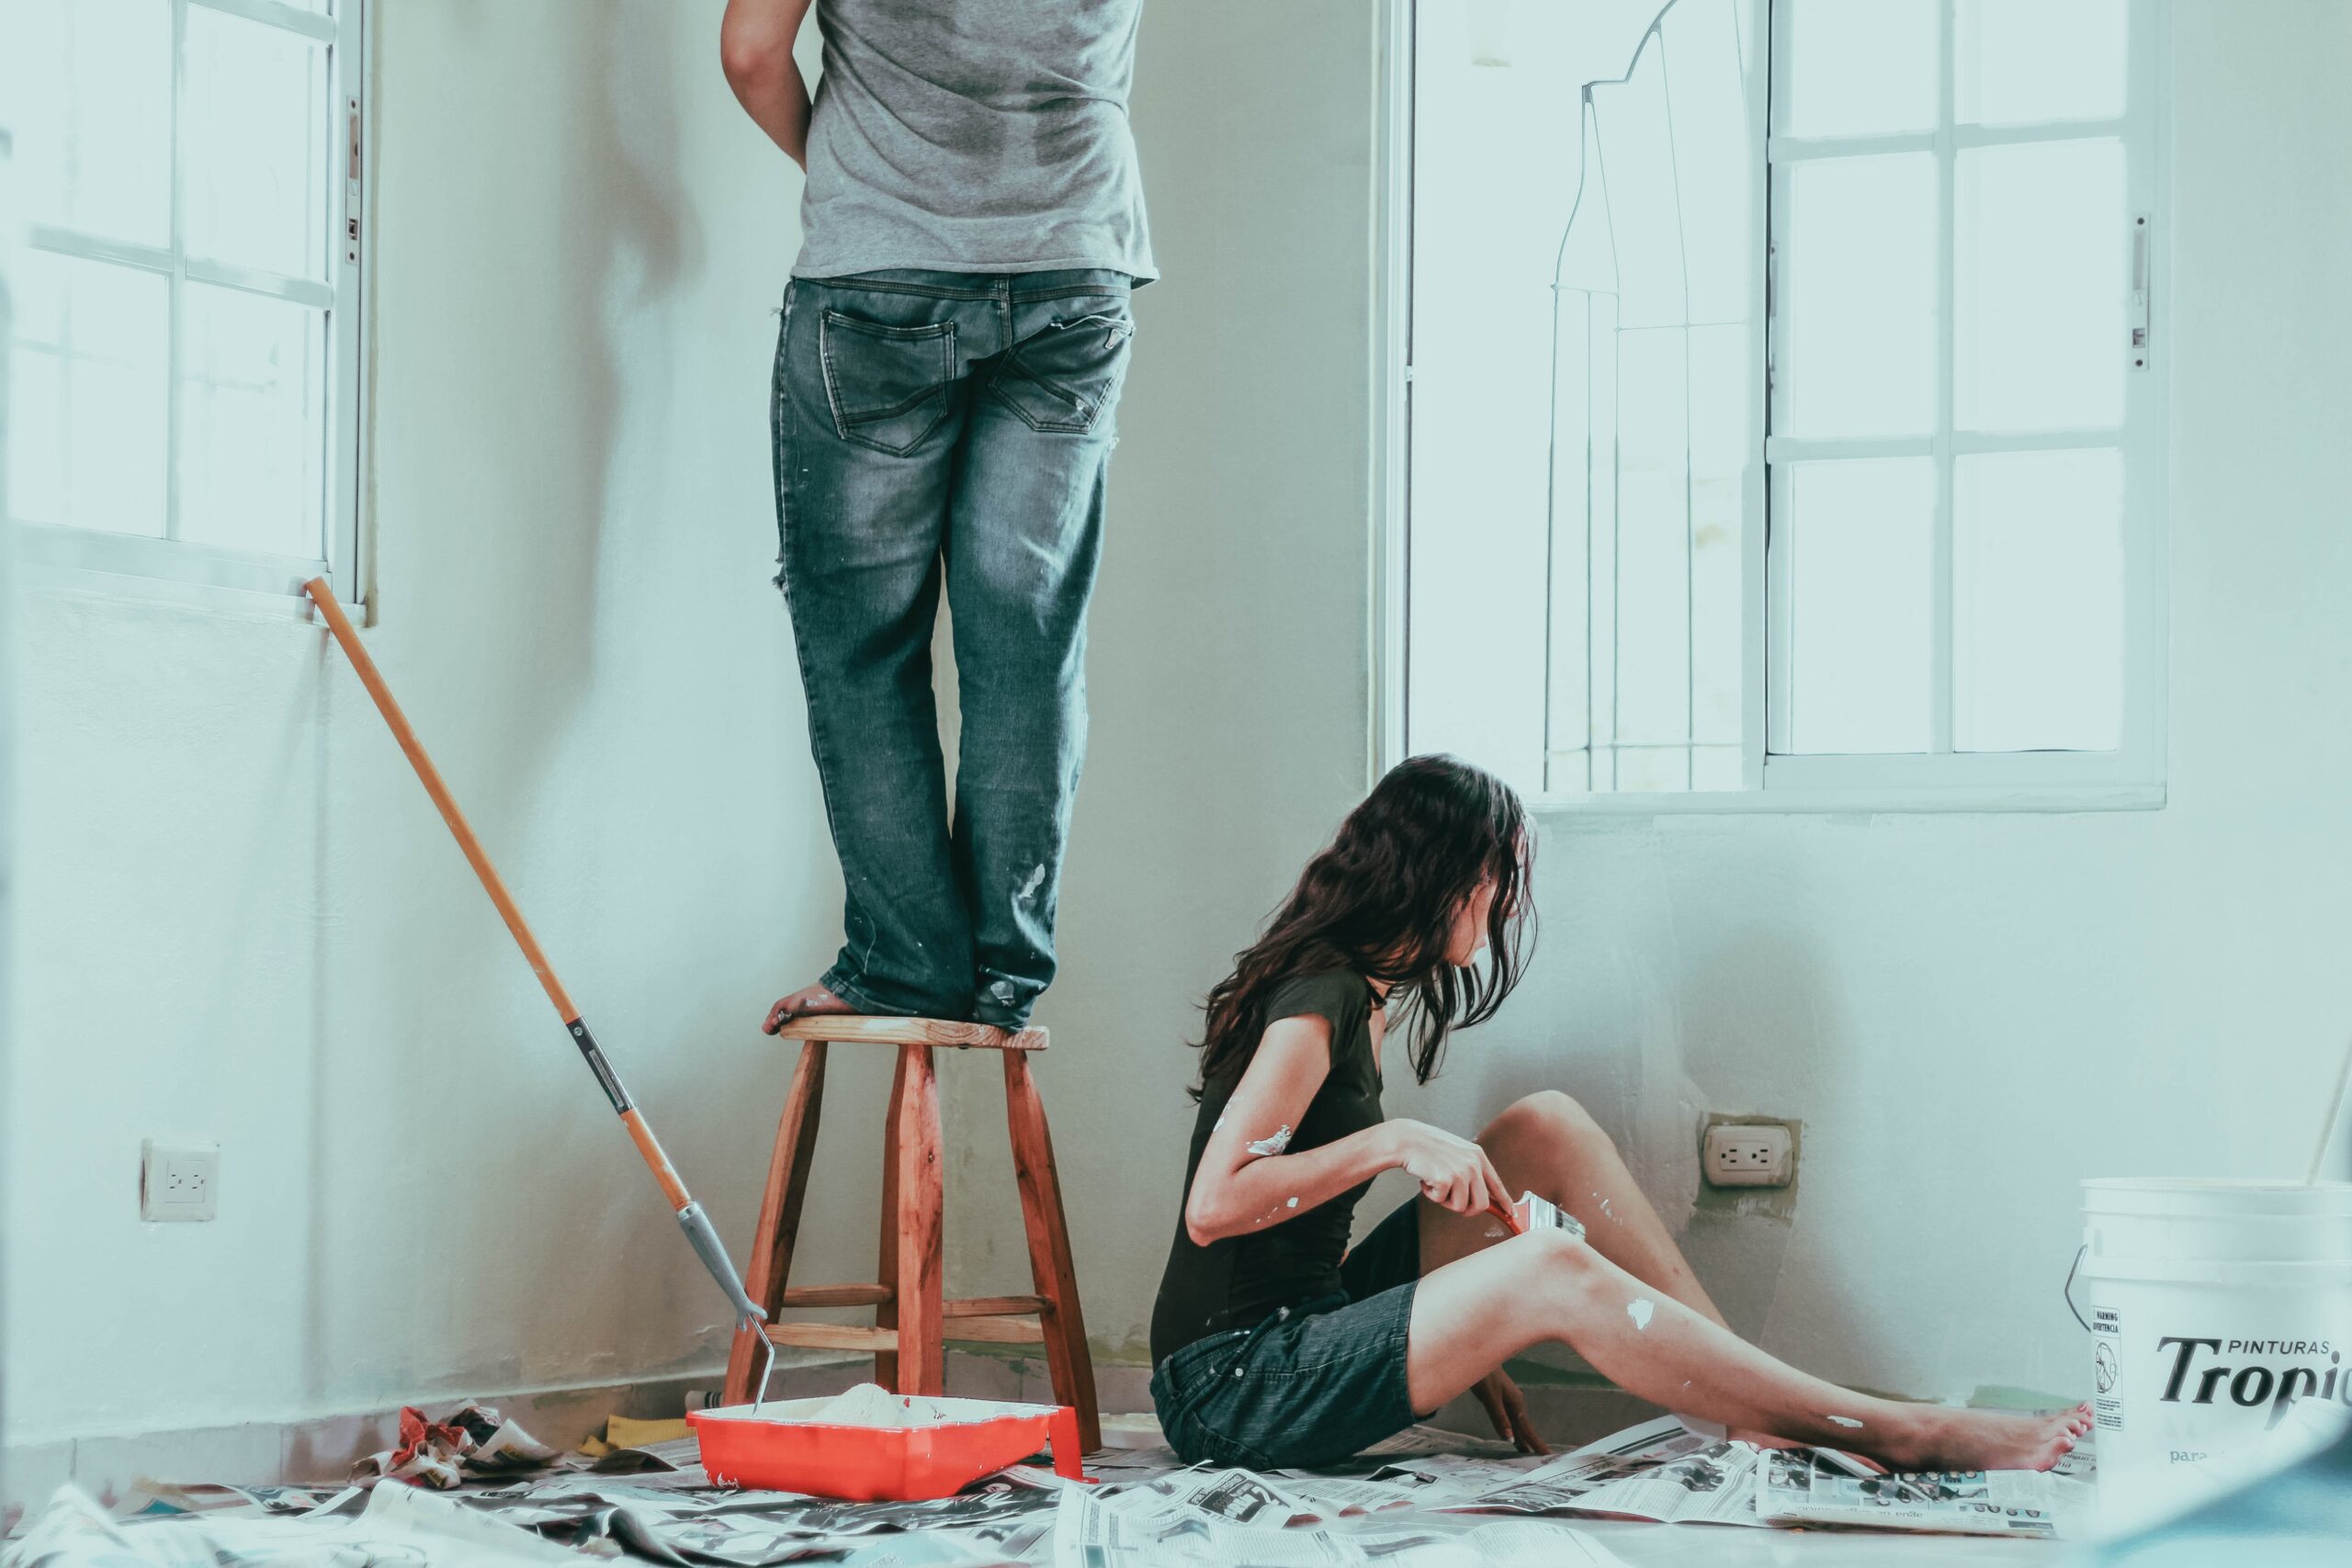 10 Renovation Mistakes to Avoid in Your Home Improvement Journey